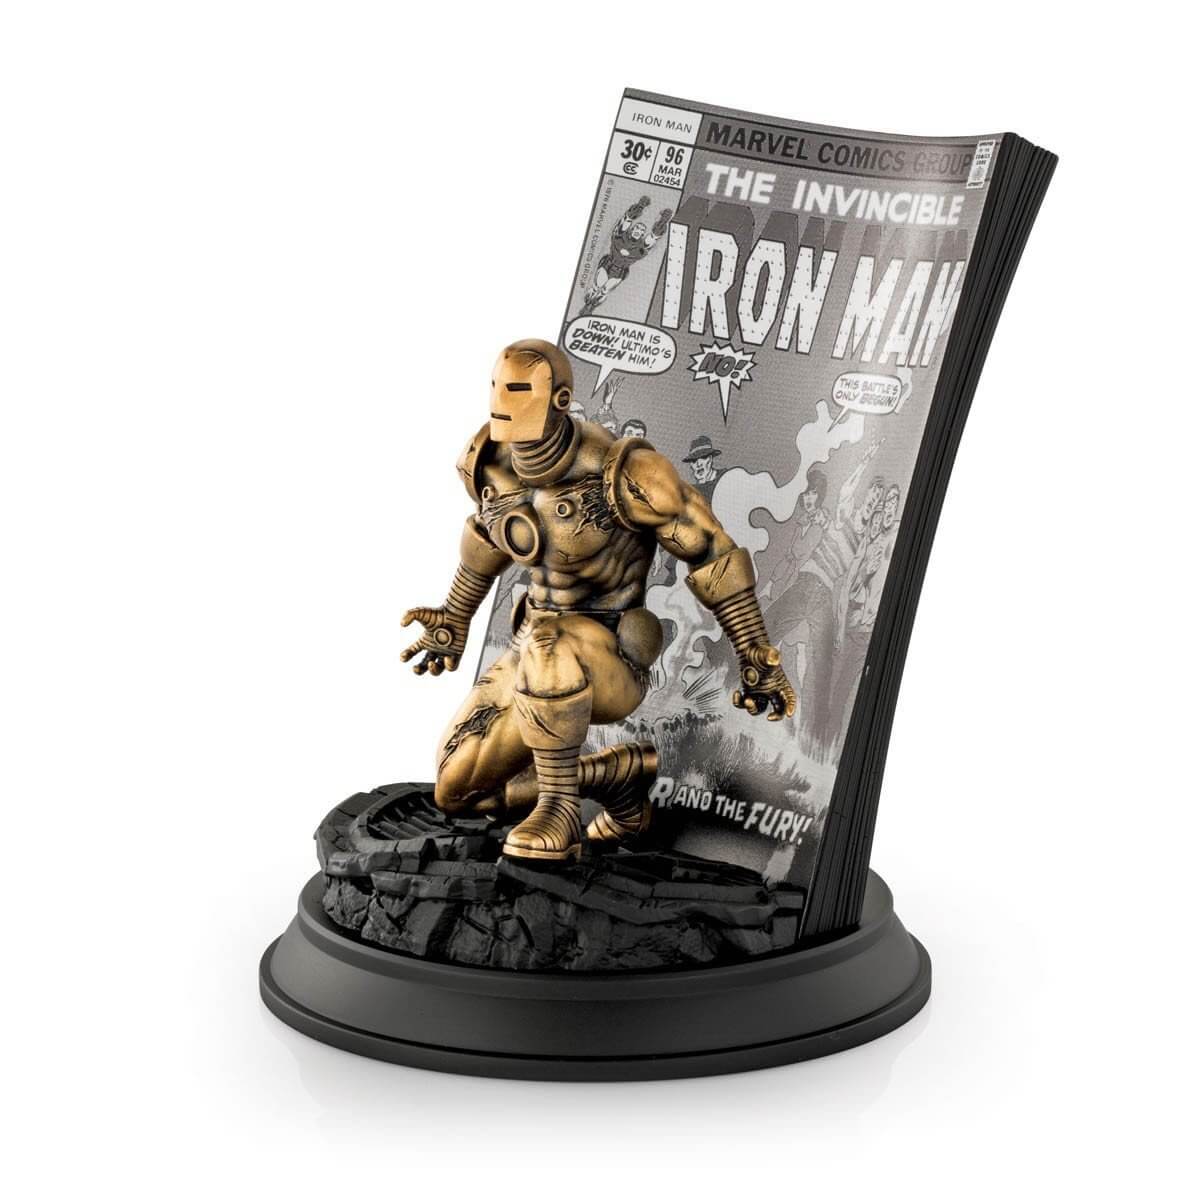 Gold The Invincible Iron Man #96 Limited Edition Figurine - Marvel Statue